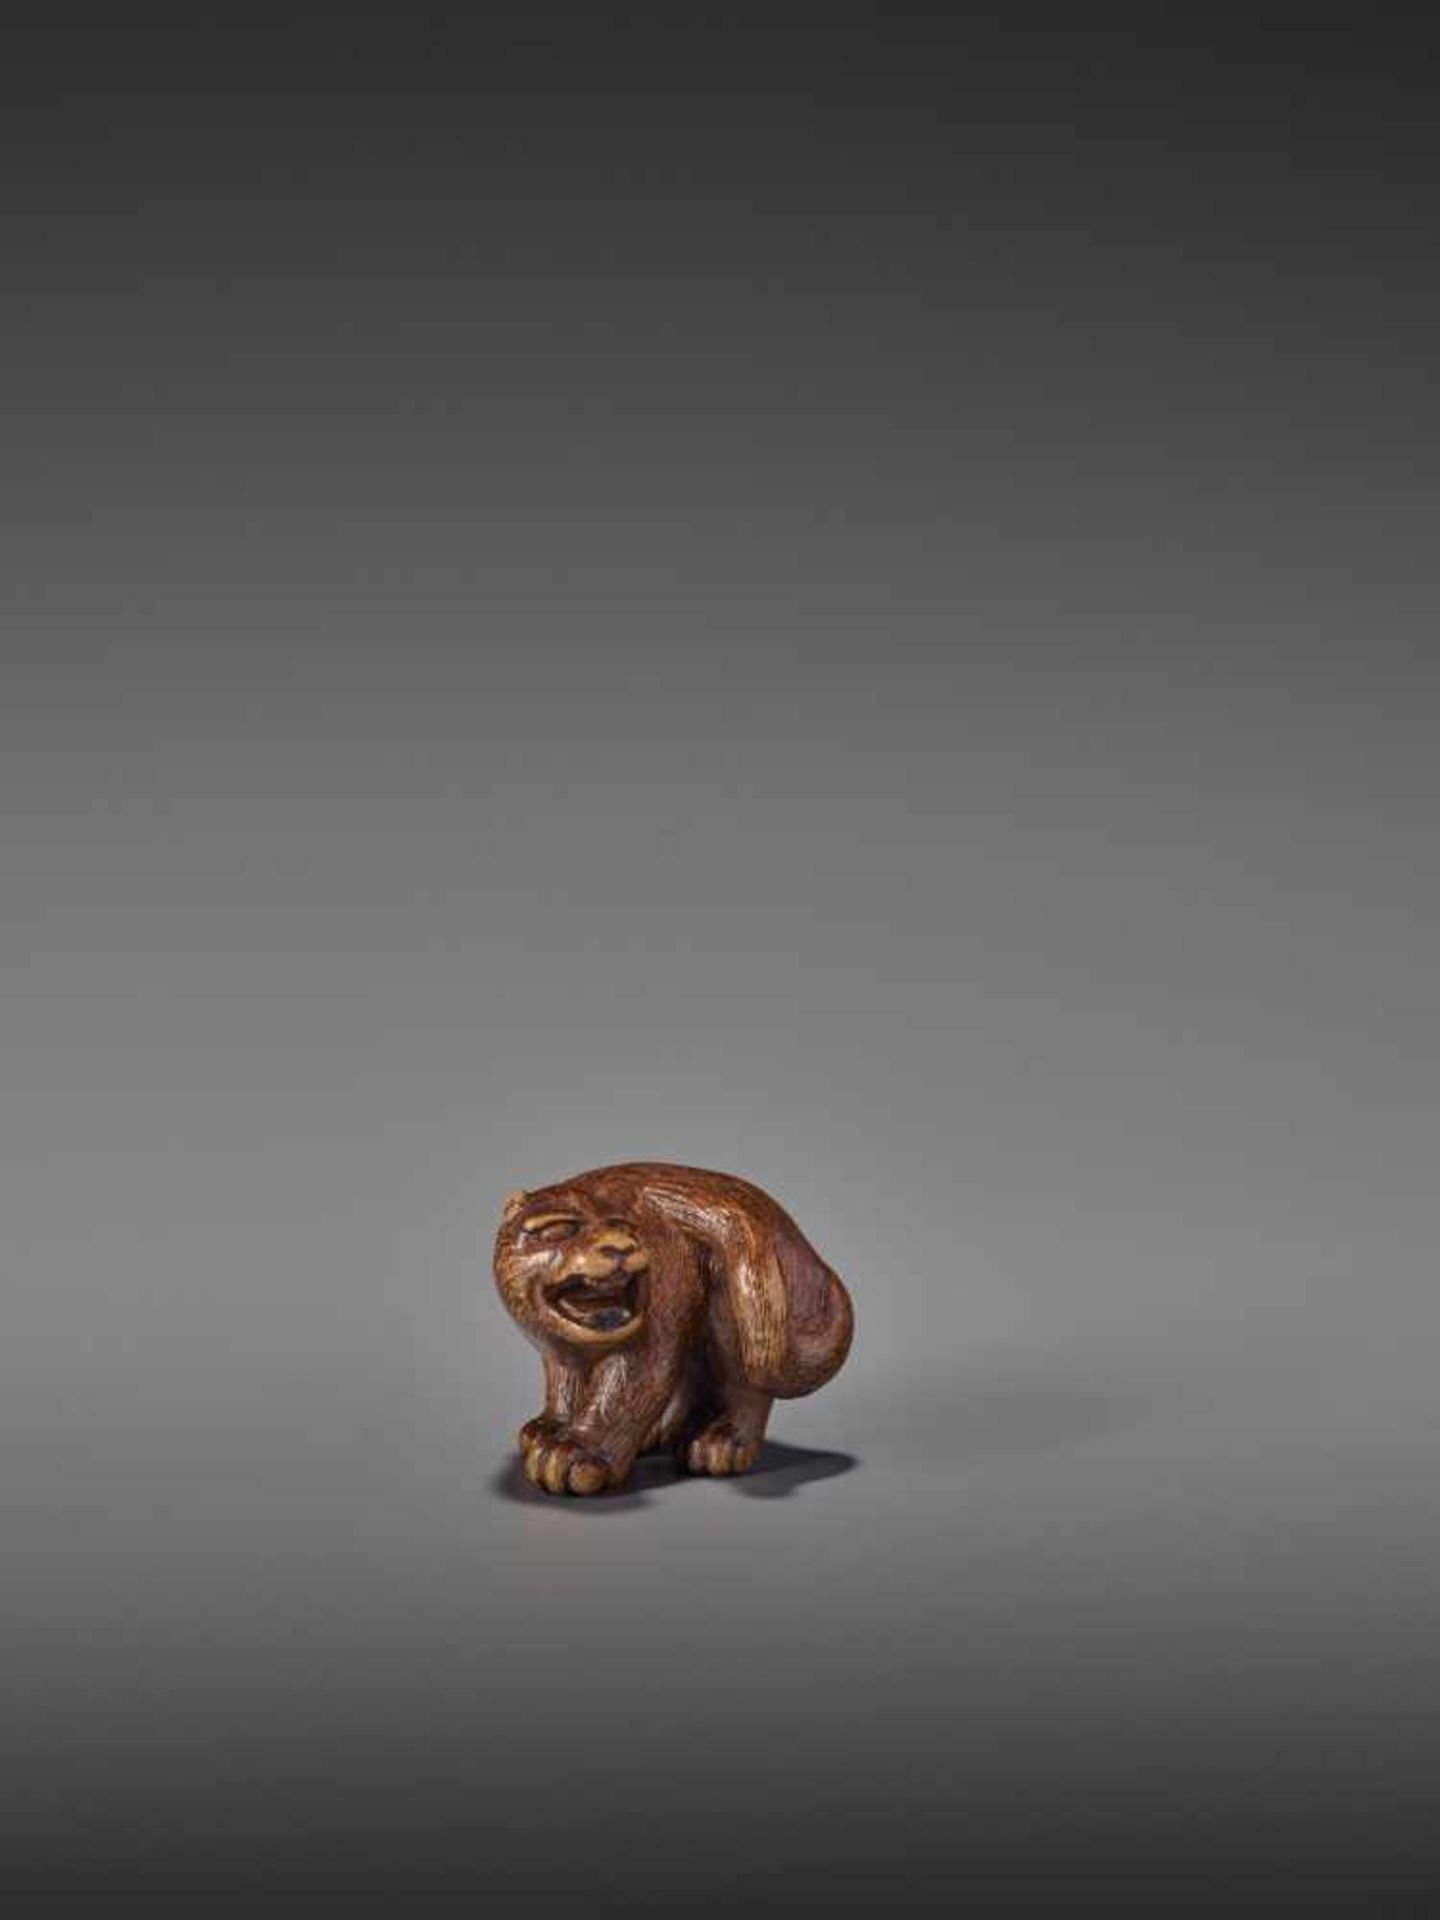 A RARE WOOD NETSUKE OF A SNARLING TIGER UnsignedJapan, 19th century, Edo period (1615-1868)A compact - Image 8 of 11